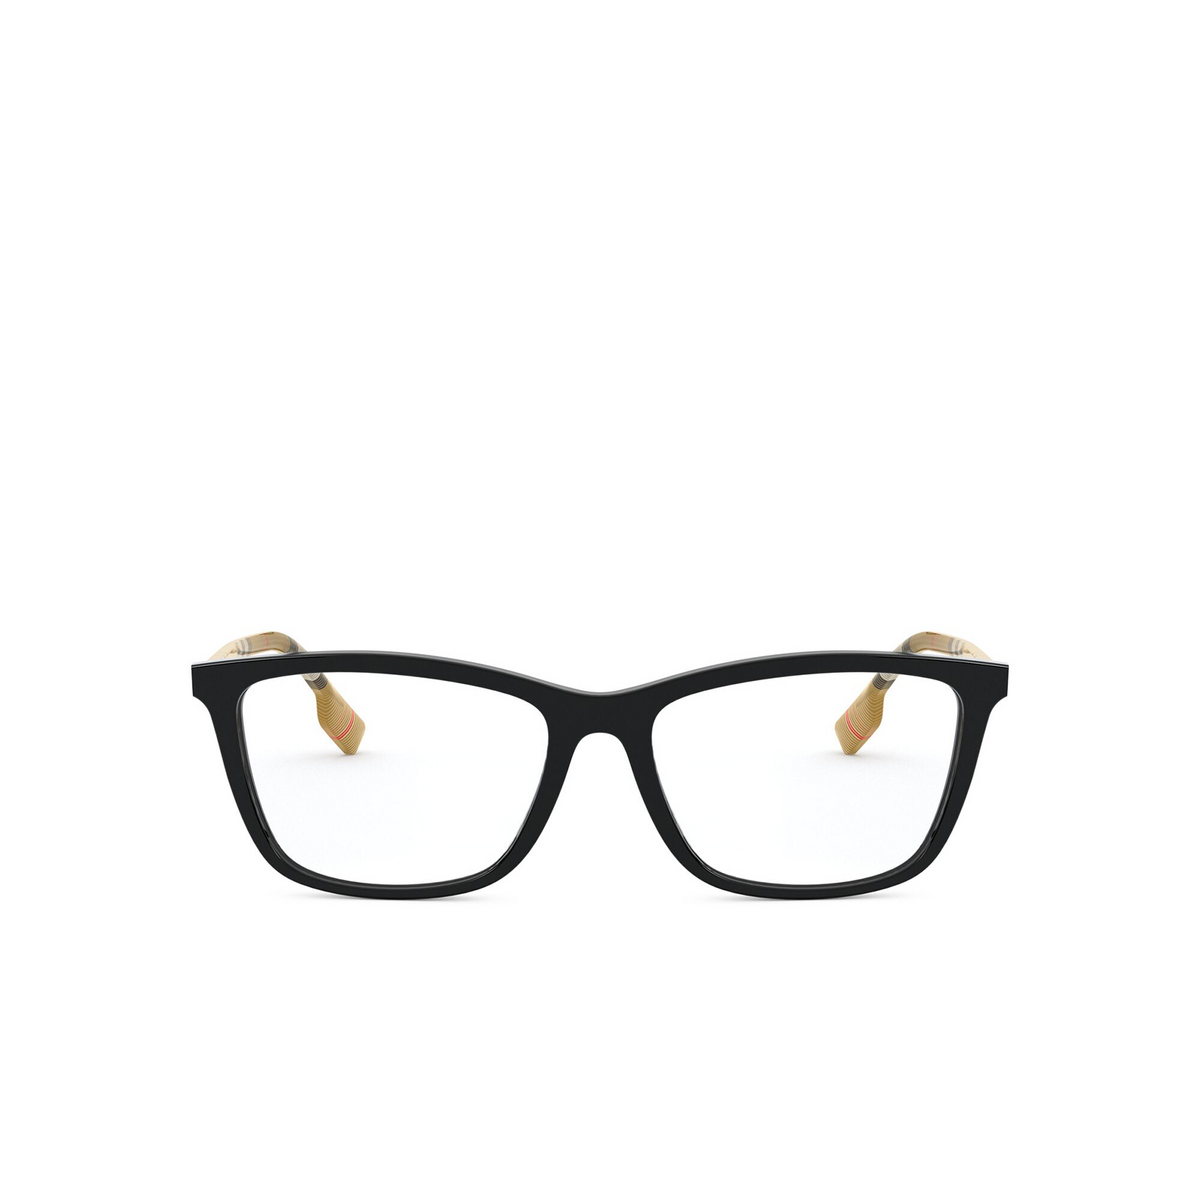 Burberry® Square Eyeglasses: Emerson BE2326 color Black 3853 - front view.